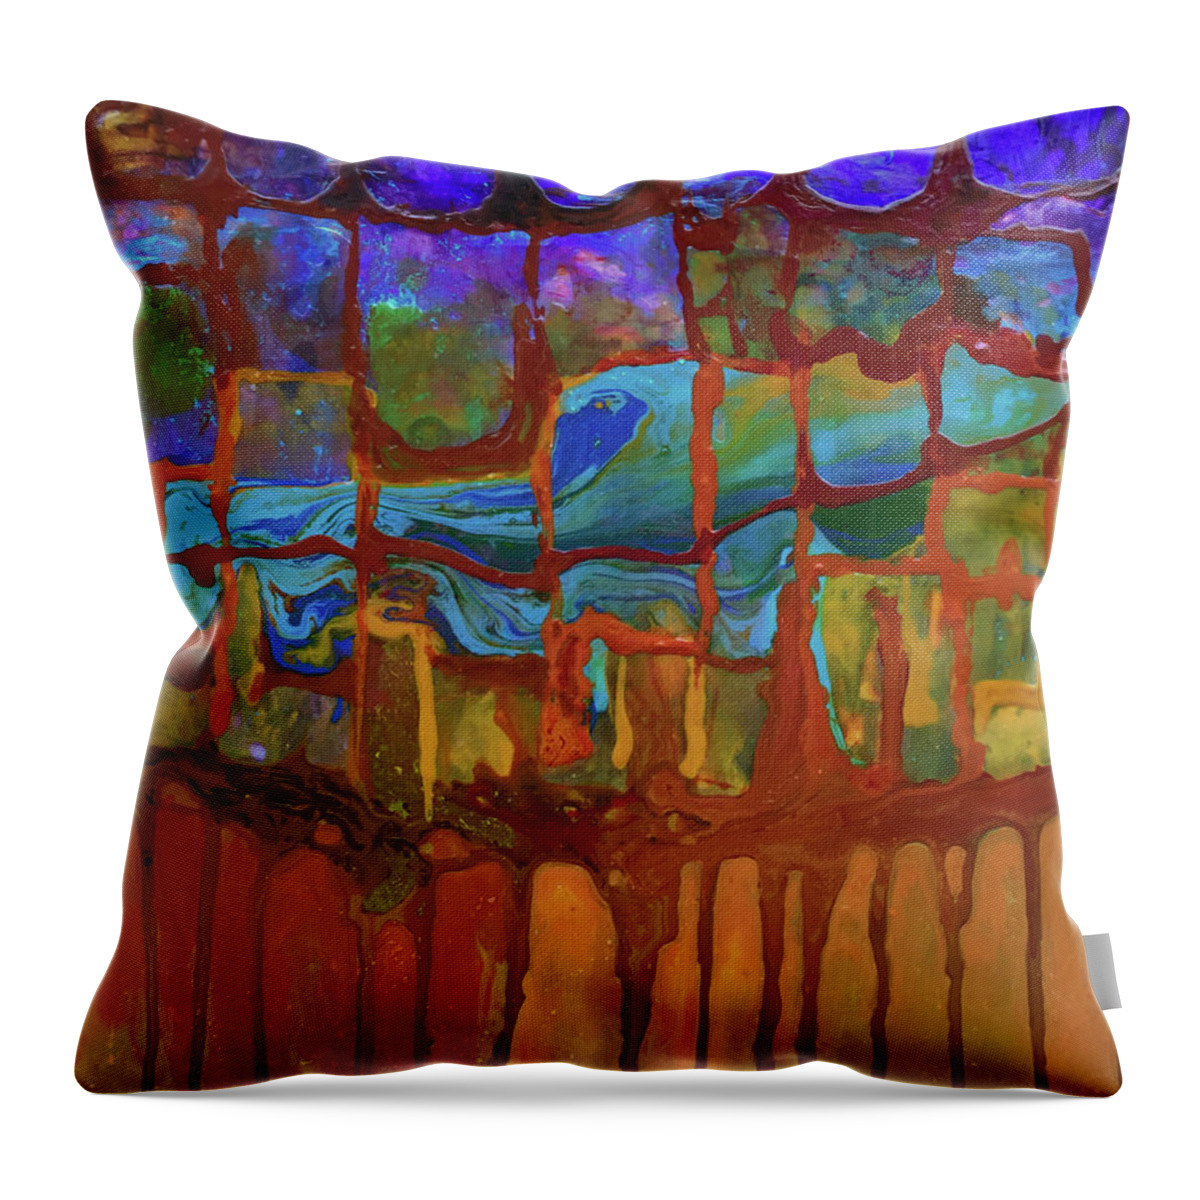 Stream Throw Pillow featuring the painting Chambers by Linda Bailey